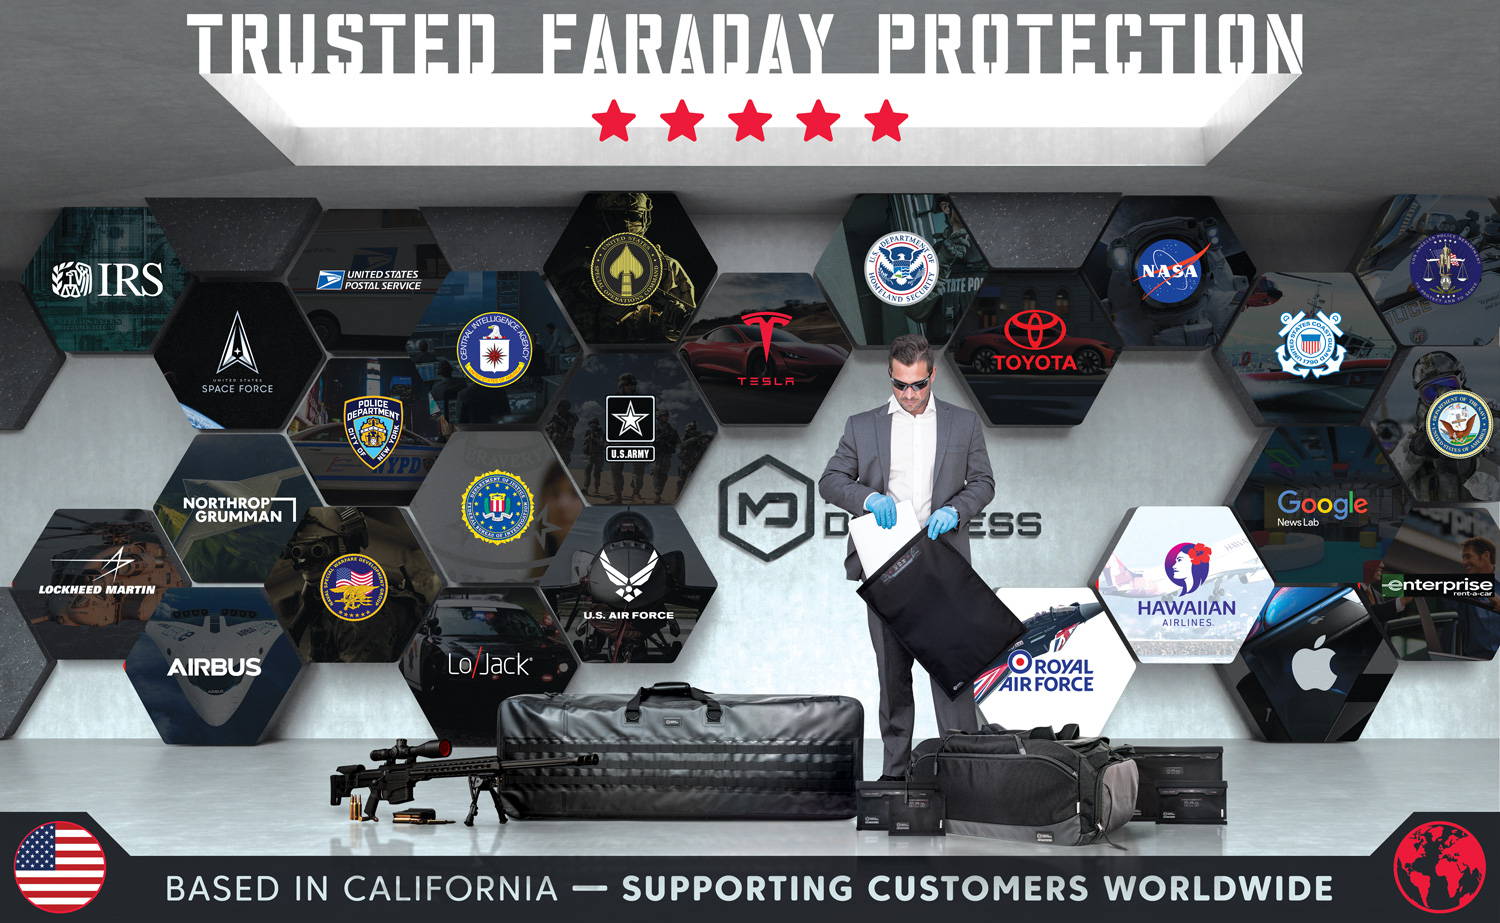 mission darkness offers trusted faraday protection supporting customers worldwide